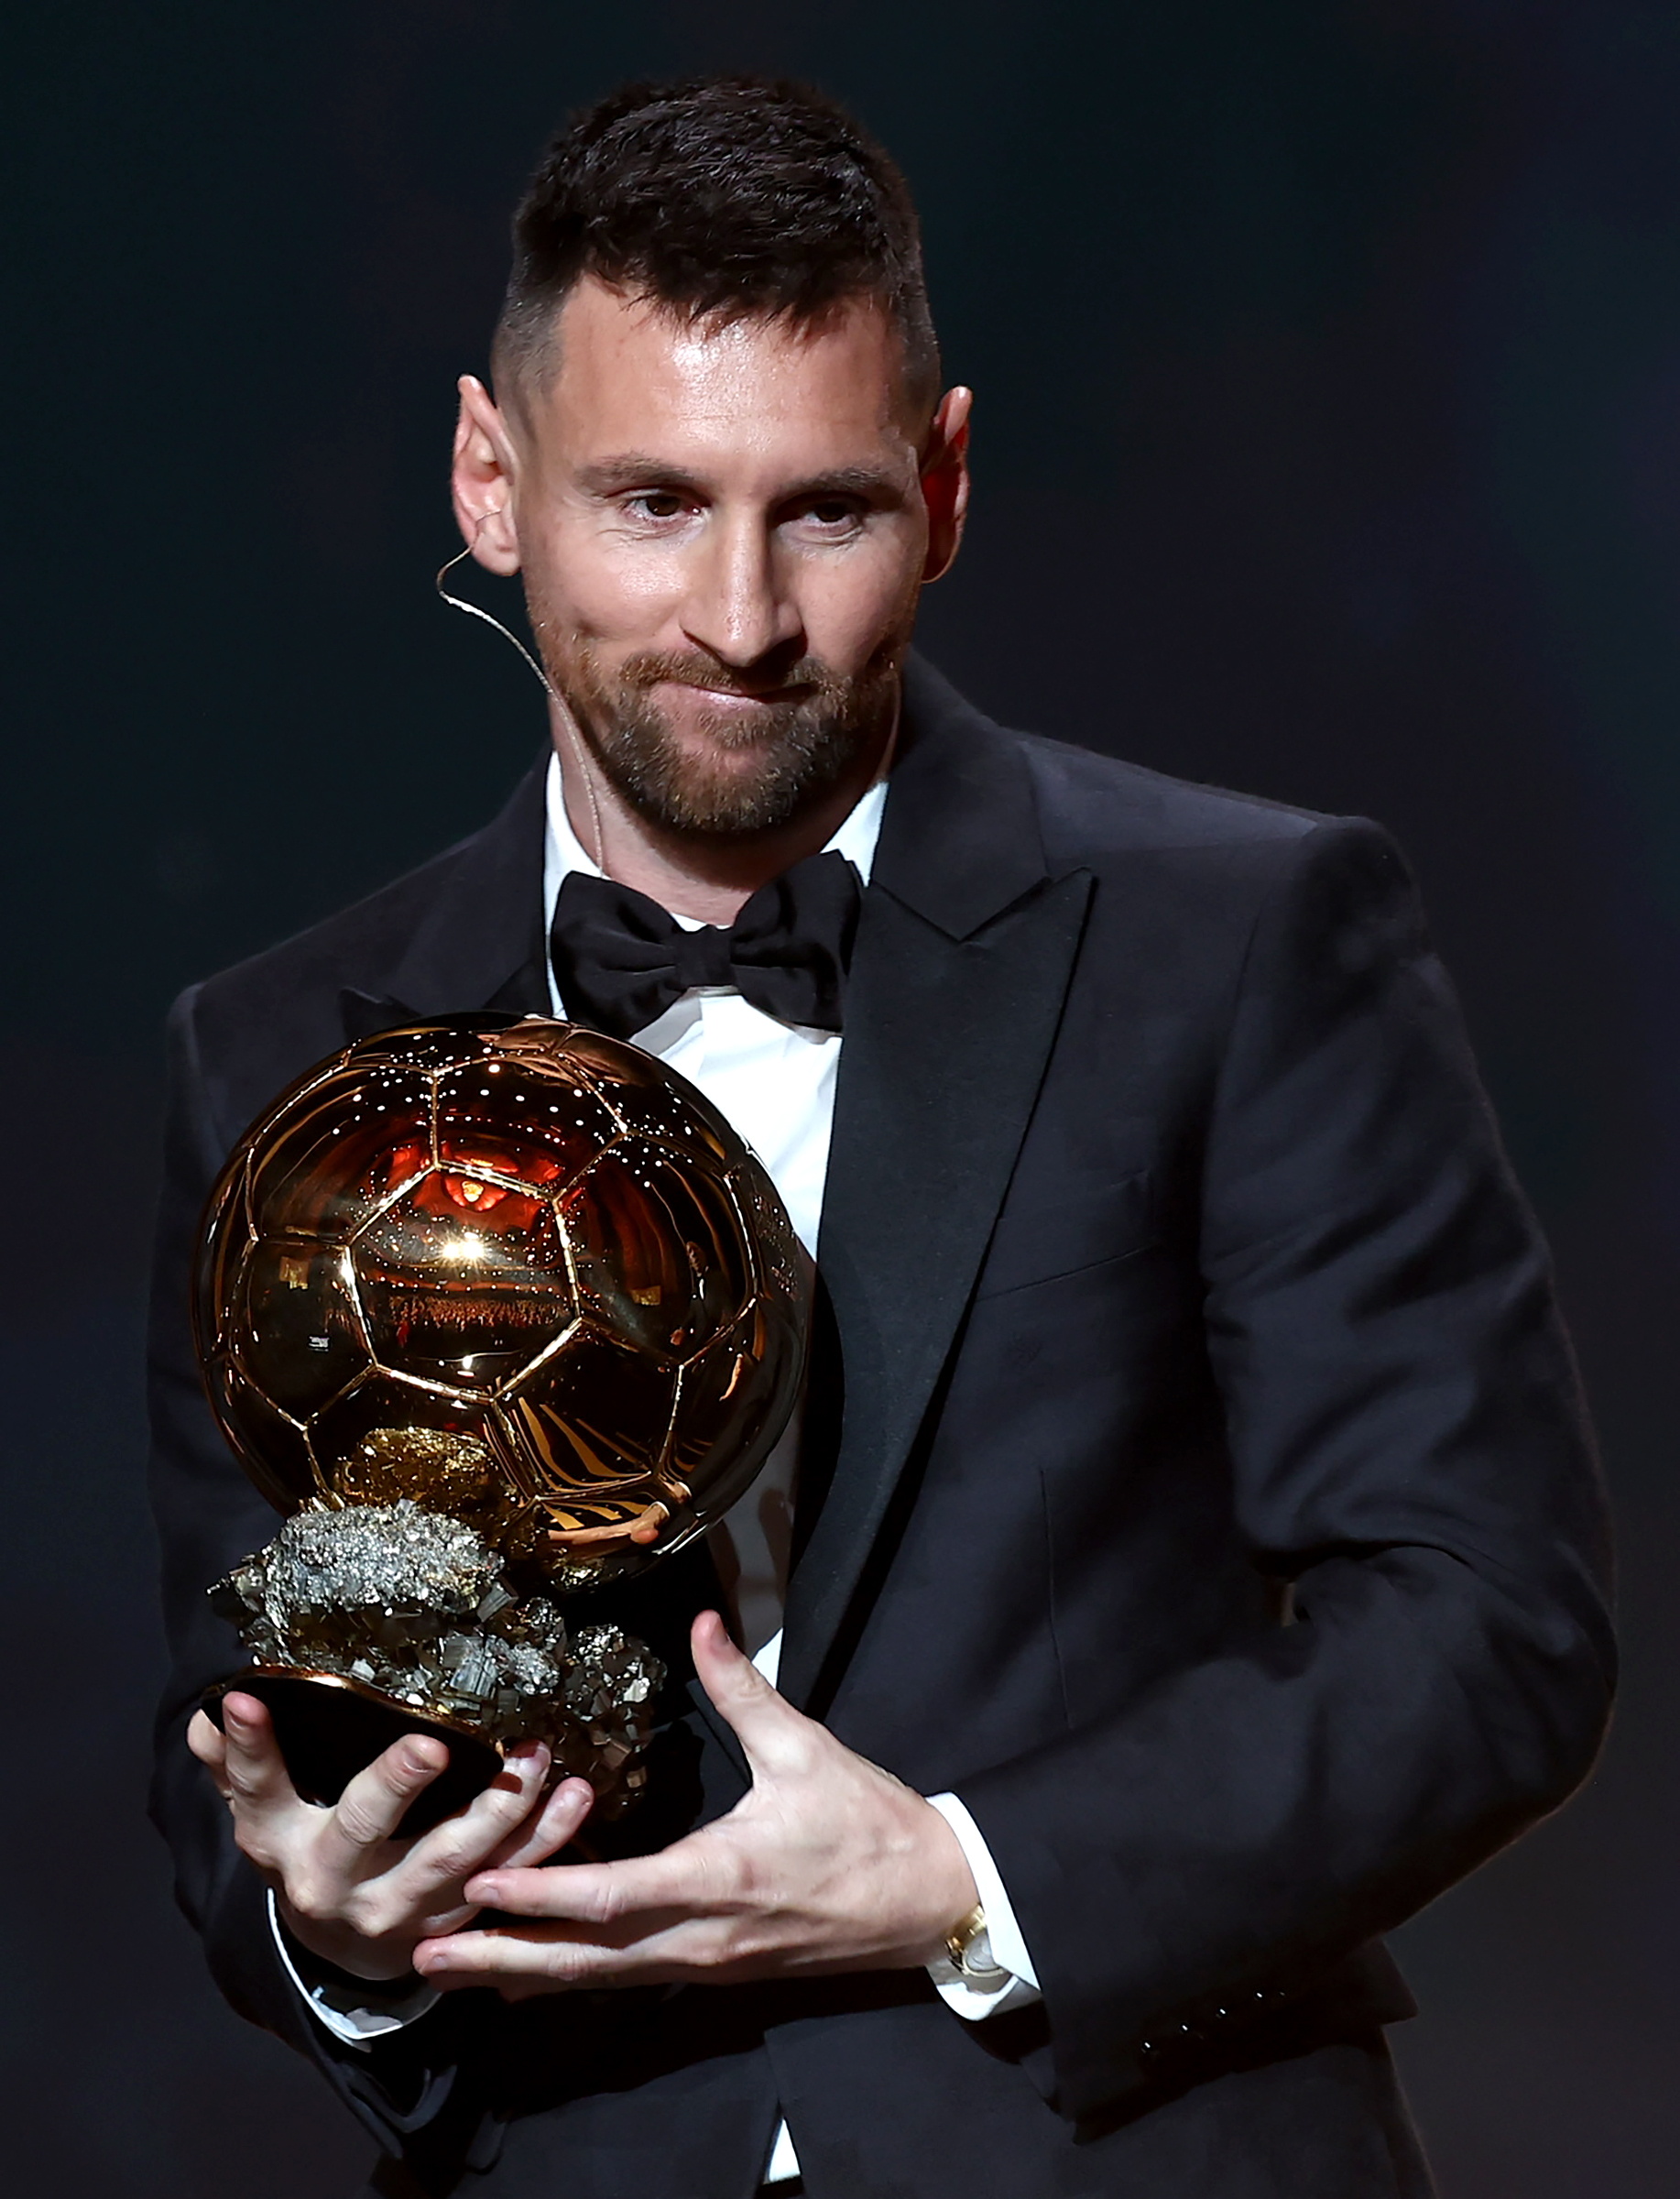 Messi picked up his eighth Ballon d'Or award last night